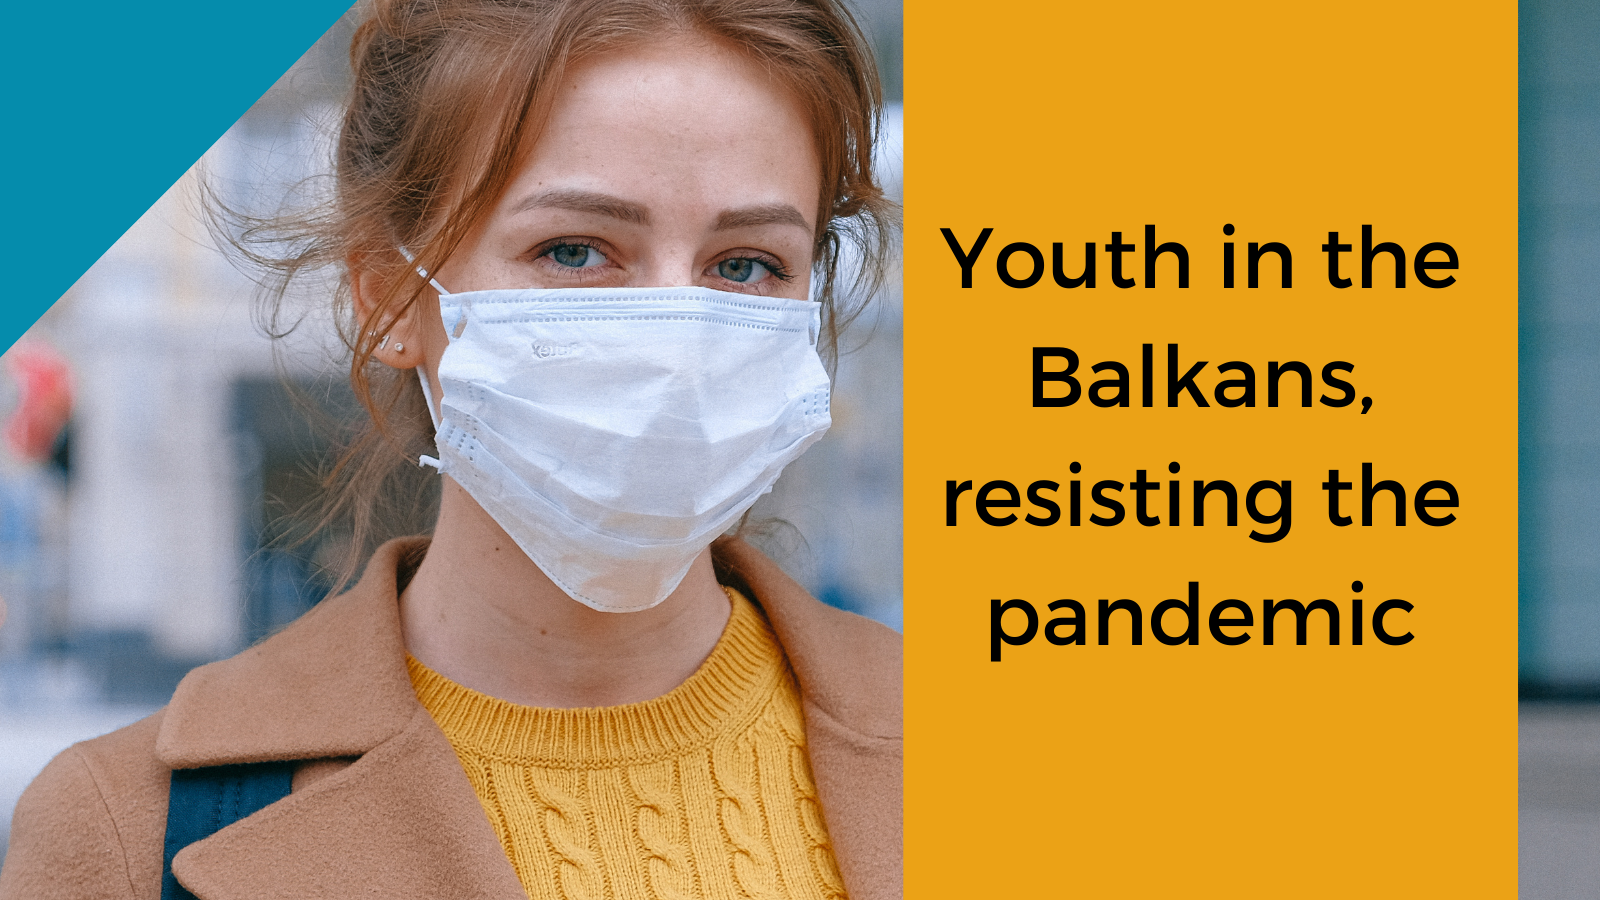 Youth in the Balkans, resisting the pandemic